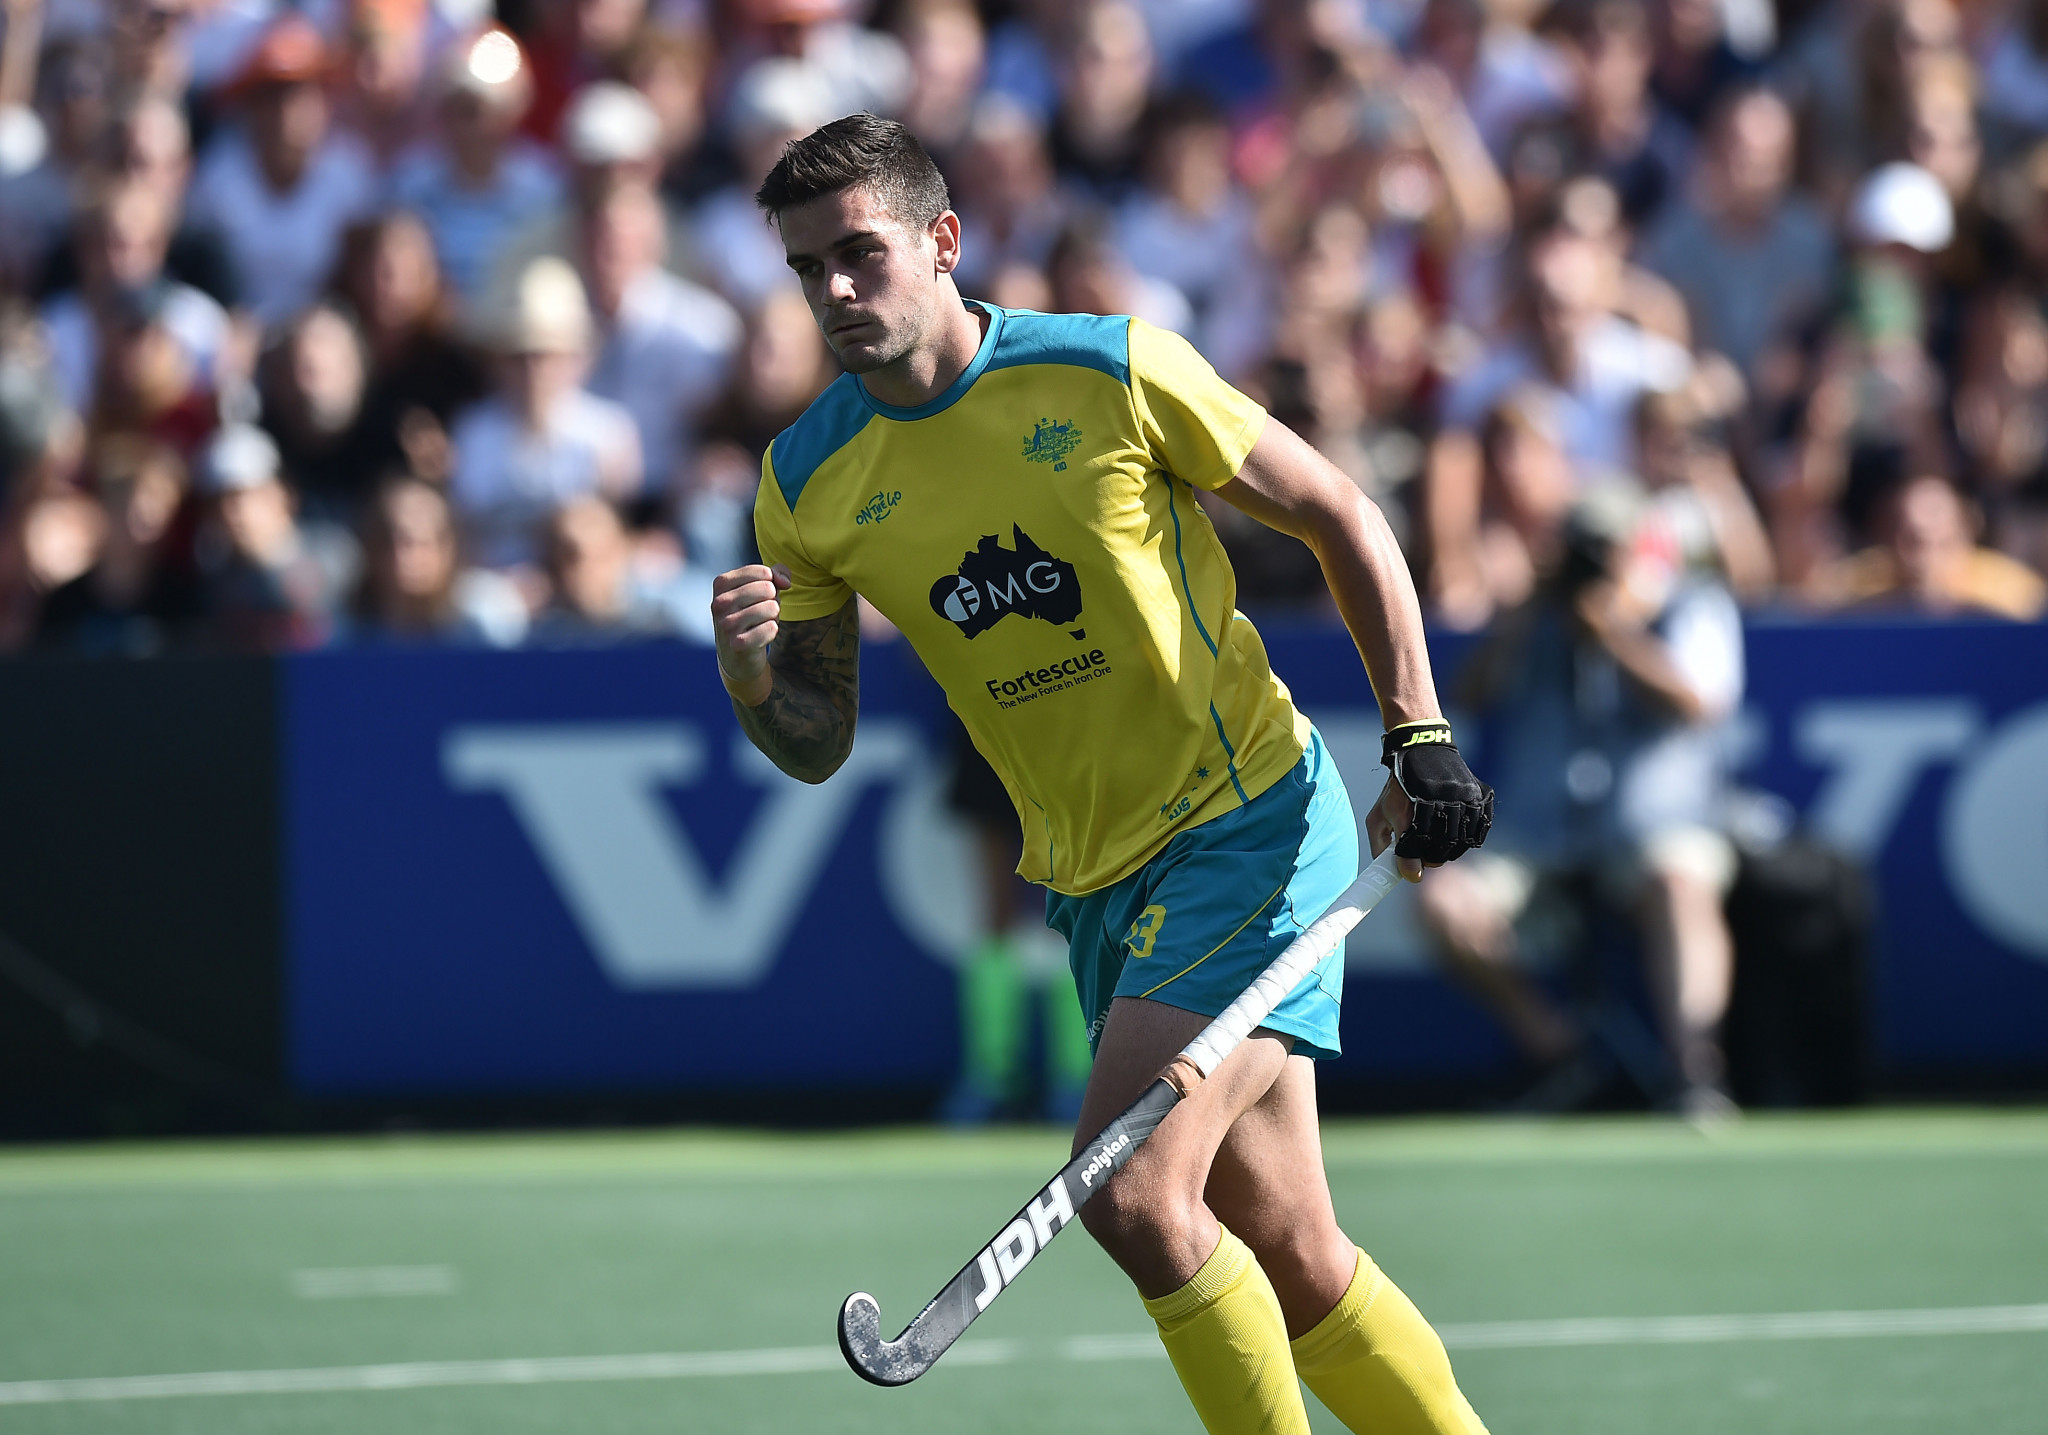 Australia's men off to a flyer at Oceania Hockey Cup as women's side lose